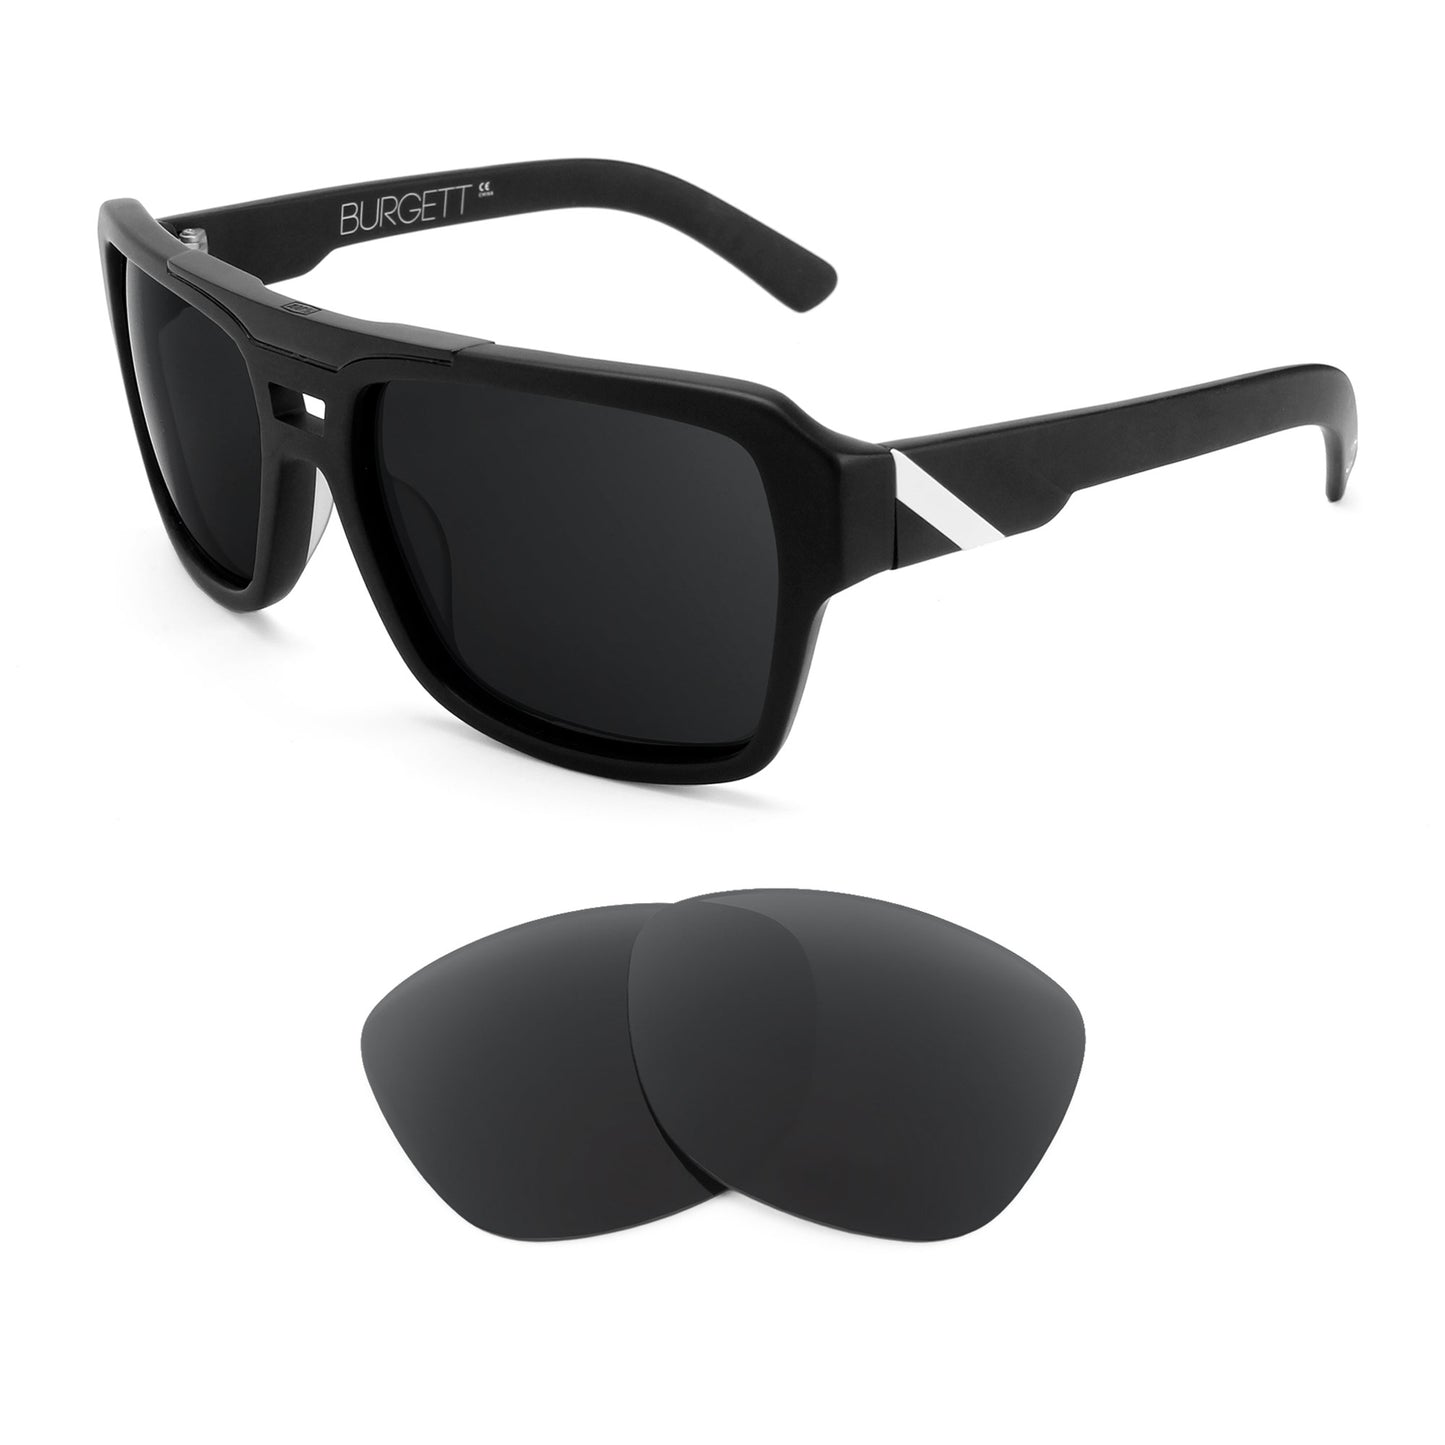 100% Burgett sunglasses with replacement lenses